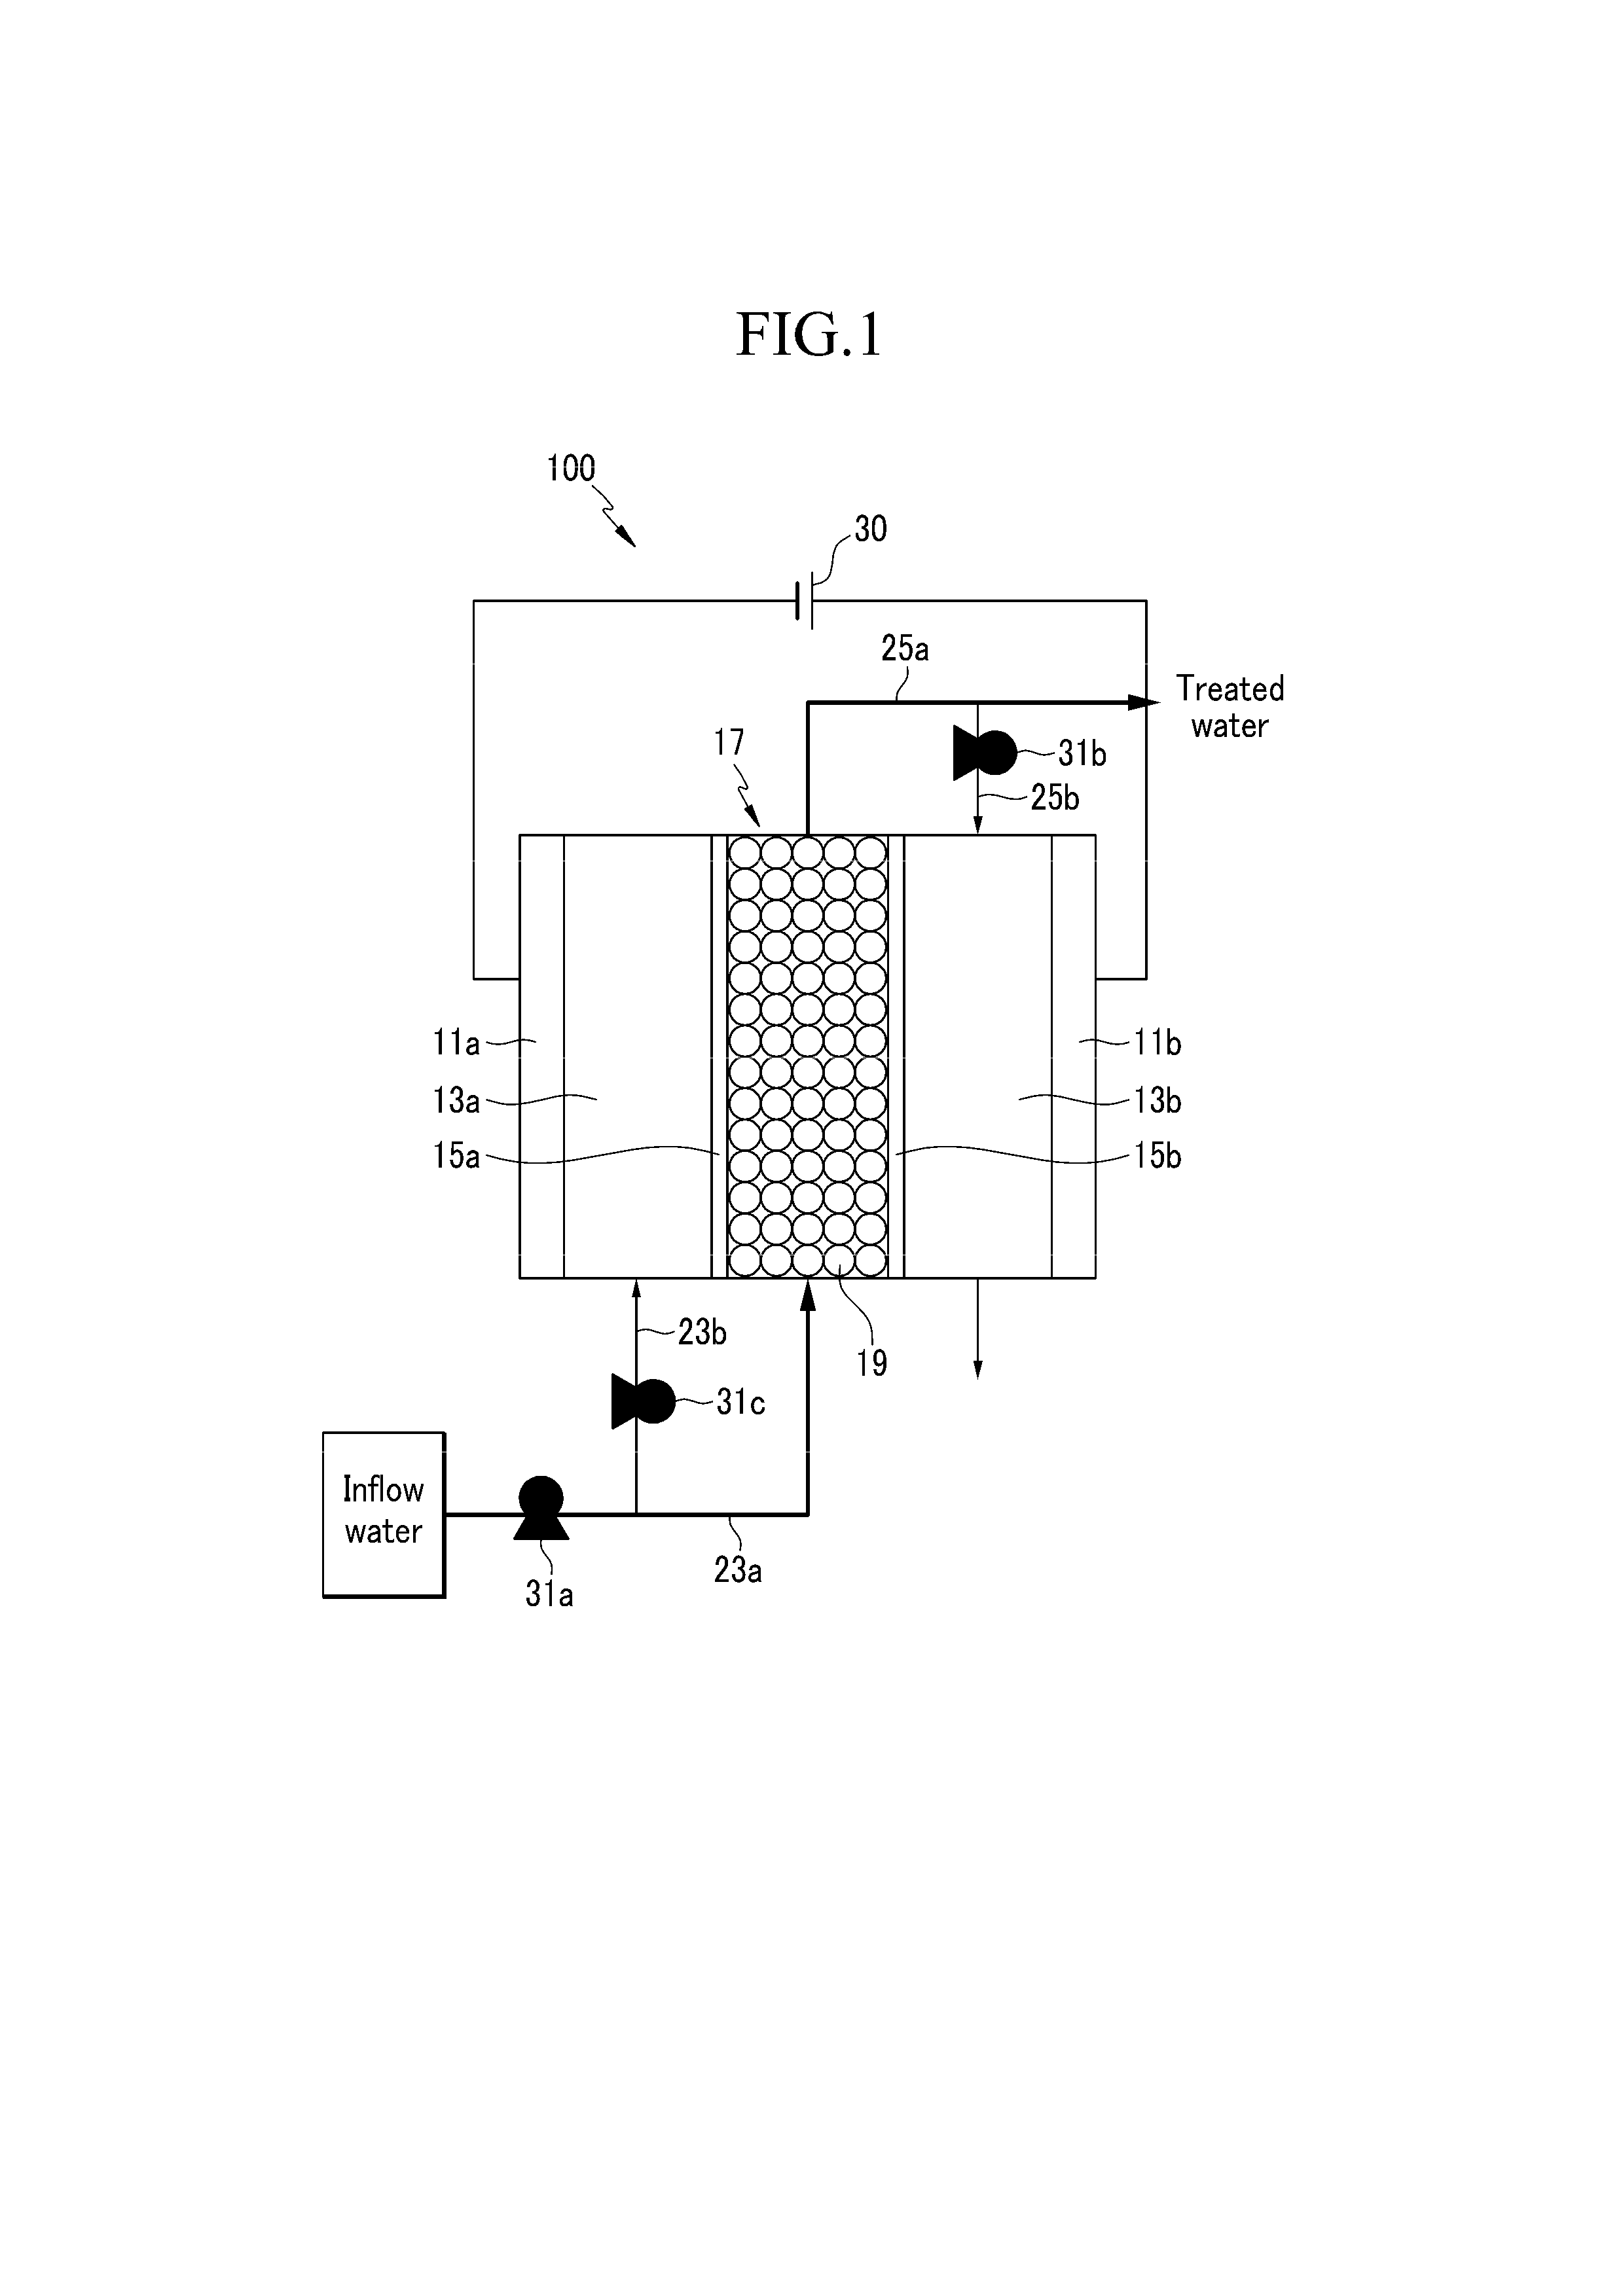 Electrically regenerable water softening apparatuses and methods of operating the same